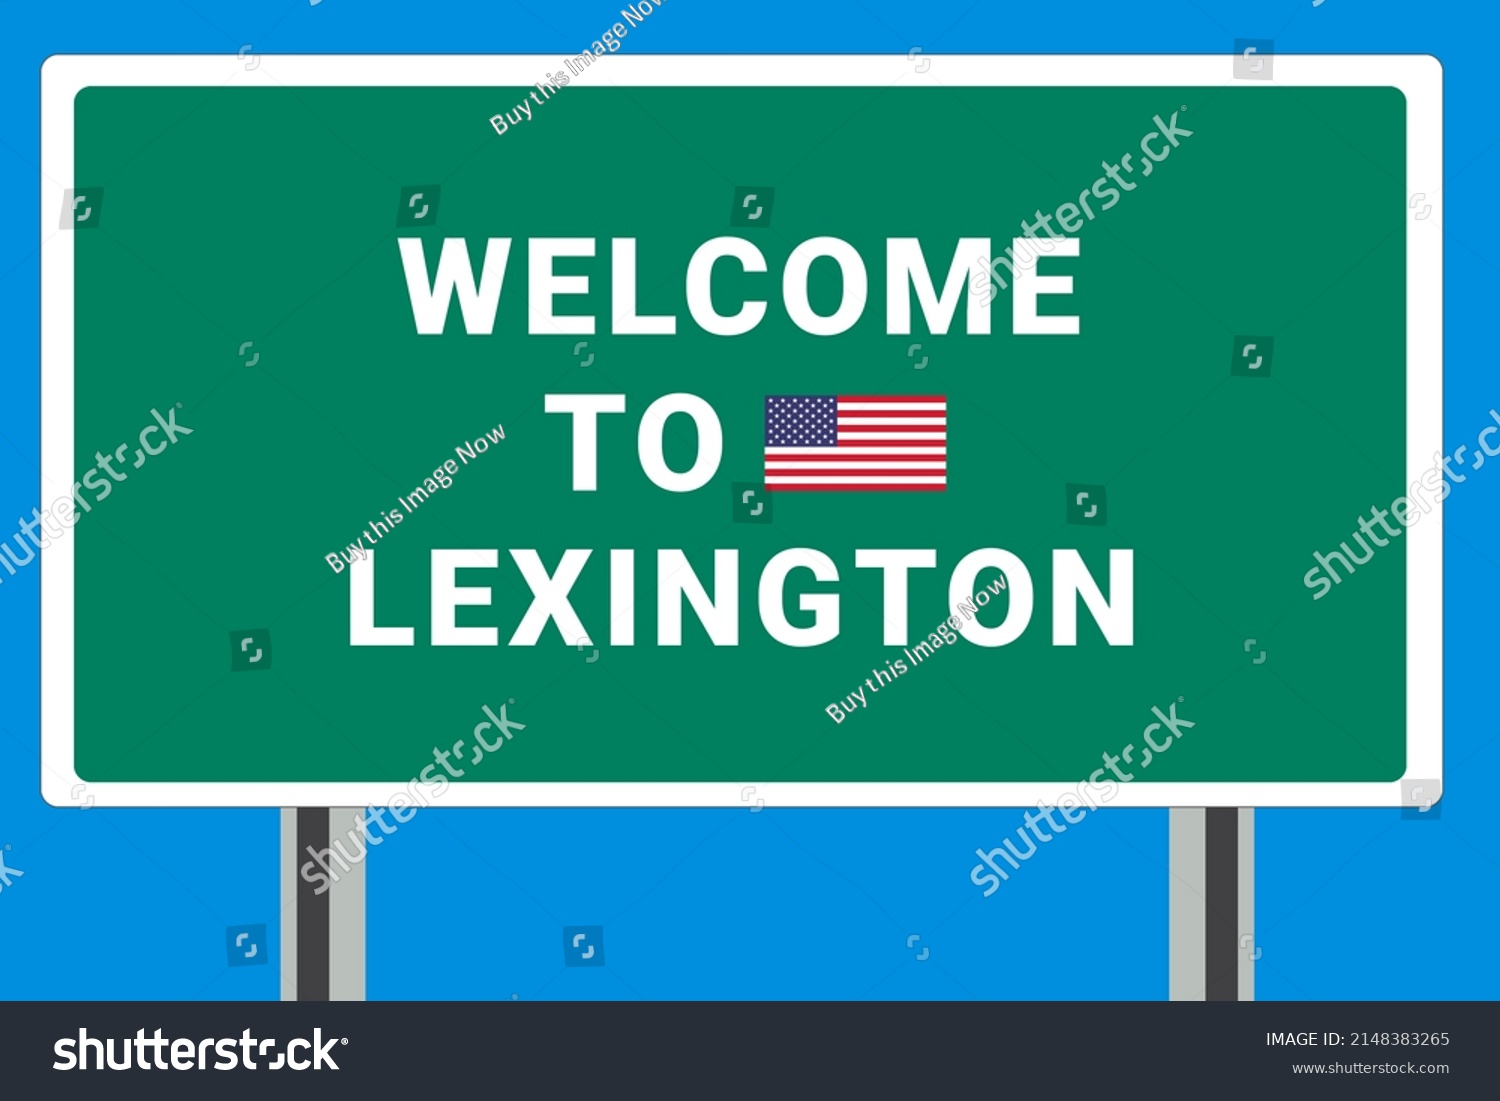 Stock Photo City Of Lexington Welcome To Lexington Greetings Upon Entering American City Illustration From 2148383265 